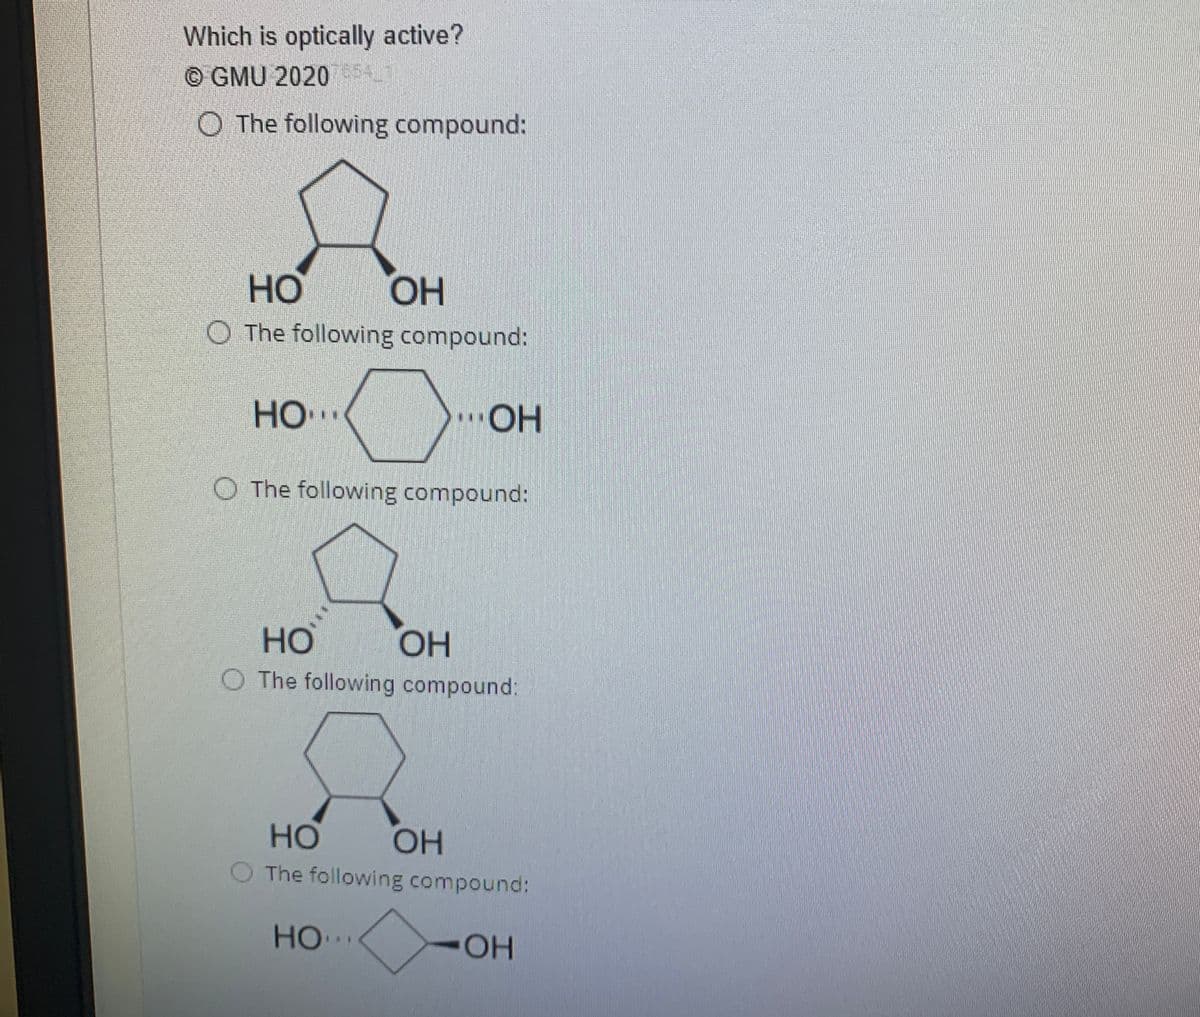 Which is optically active?
© GMU 202054
O The following compound:
Но
O The following compound:
HO.
HO
O The following compound:
но
O The following compound:
HO.
HO
HOH
The following compound:
HO
OH
